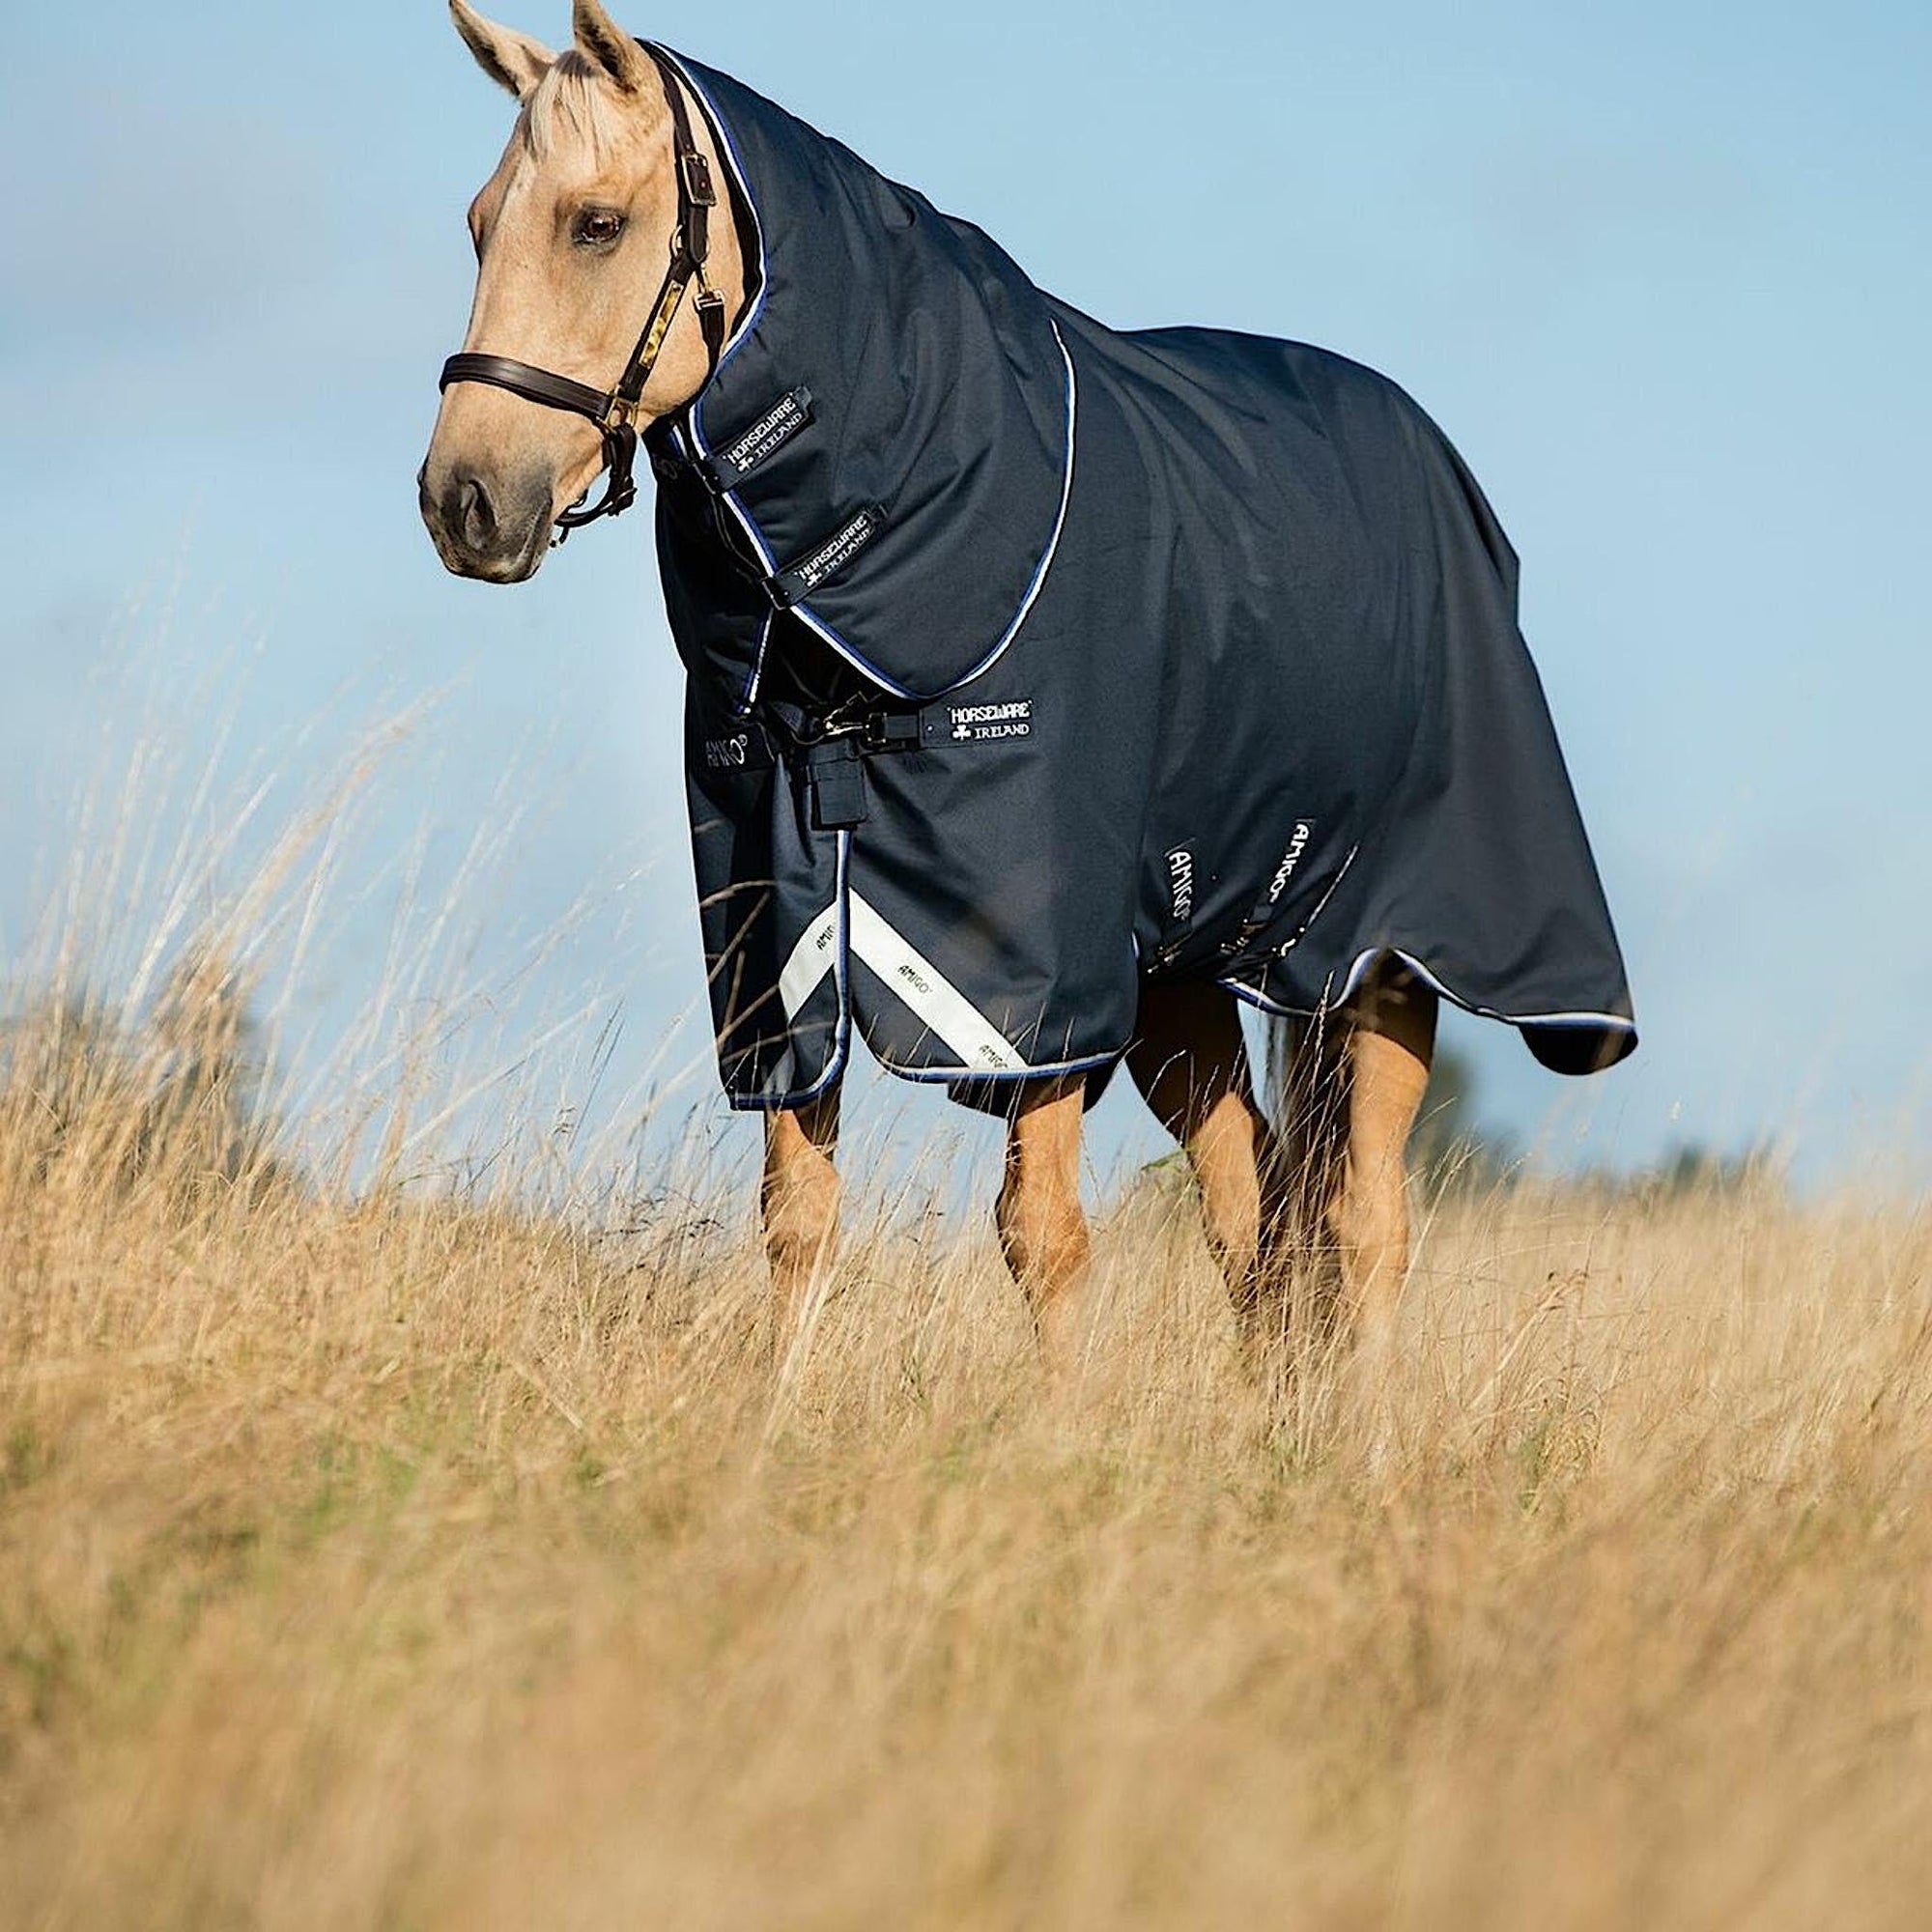 Navy waterproof horse rug that fits well.